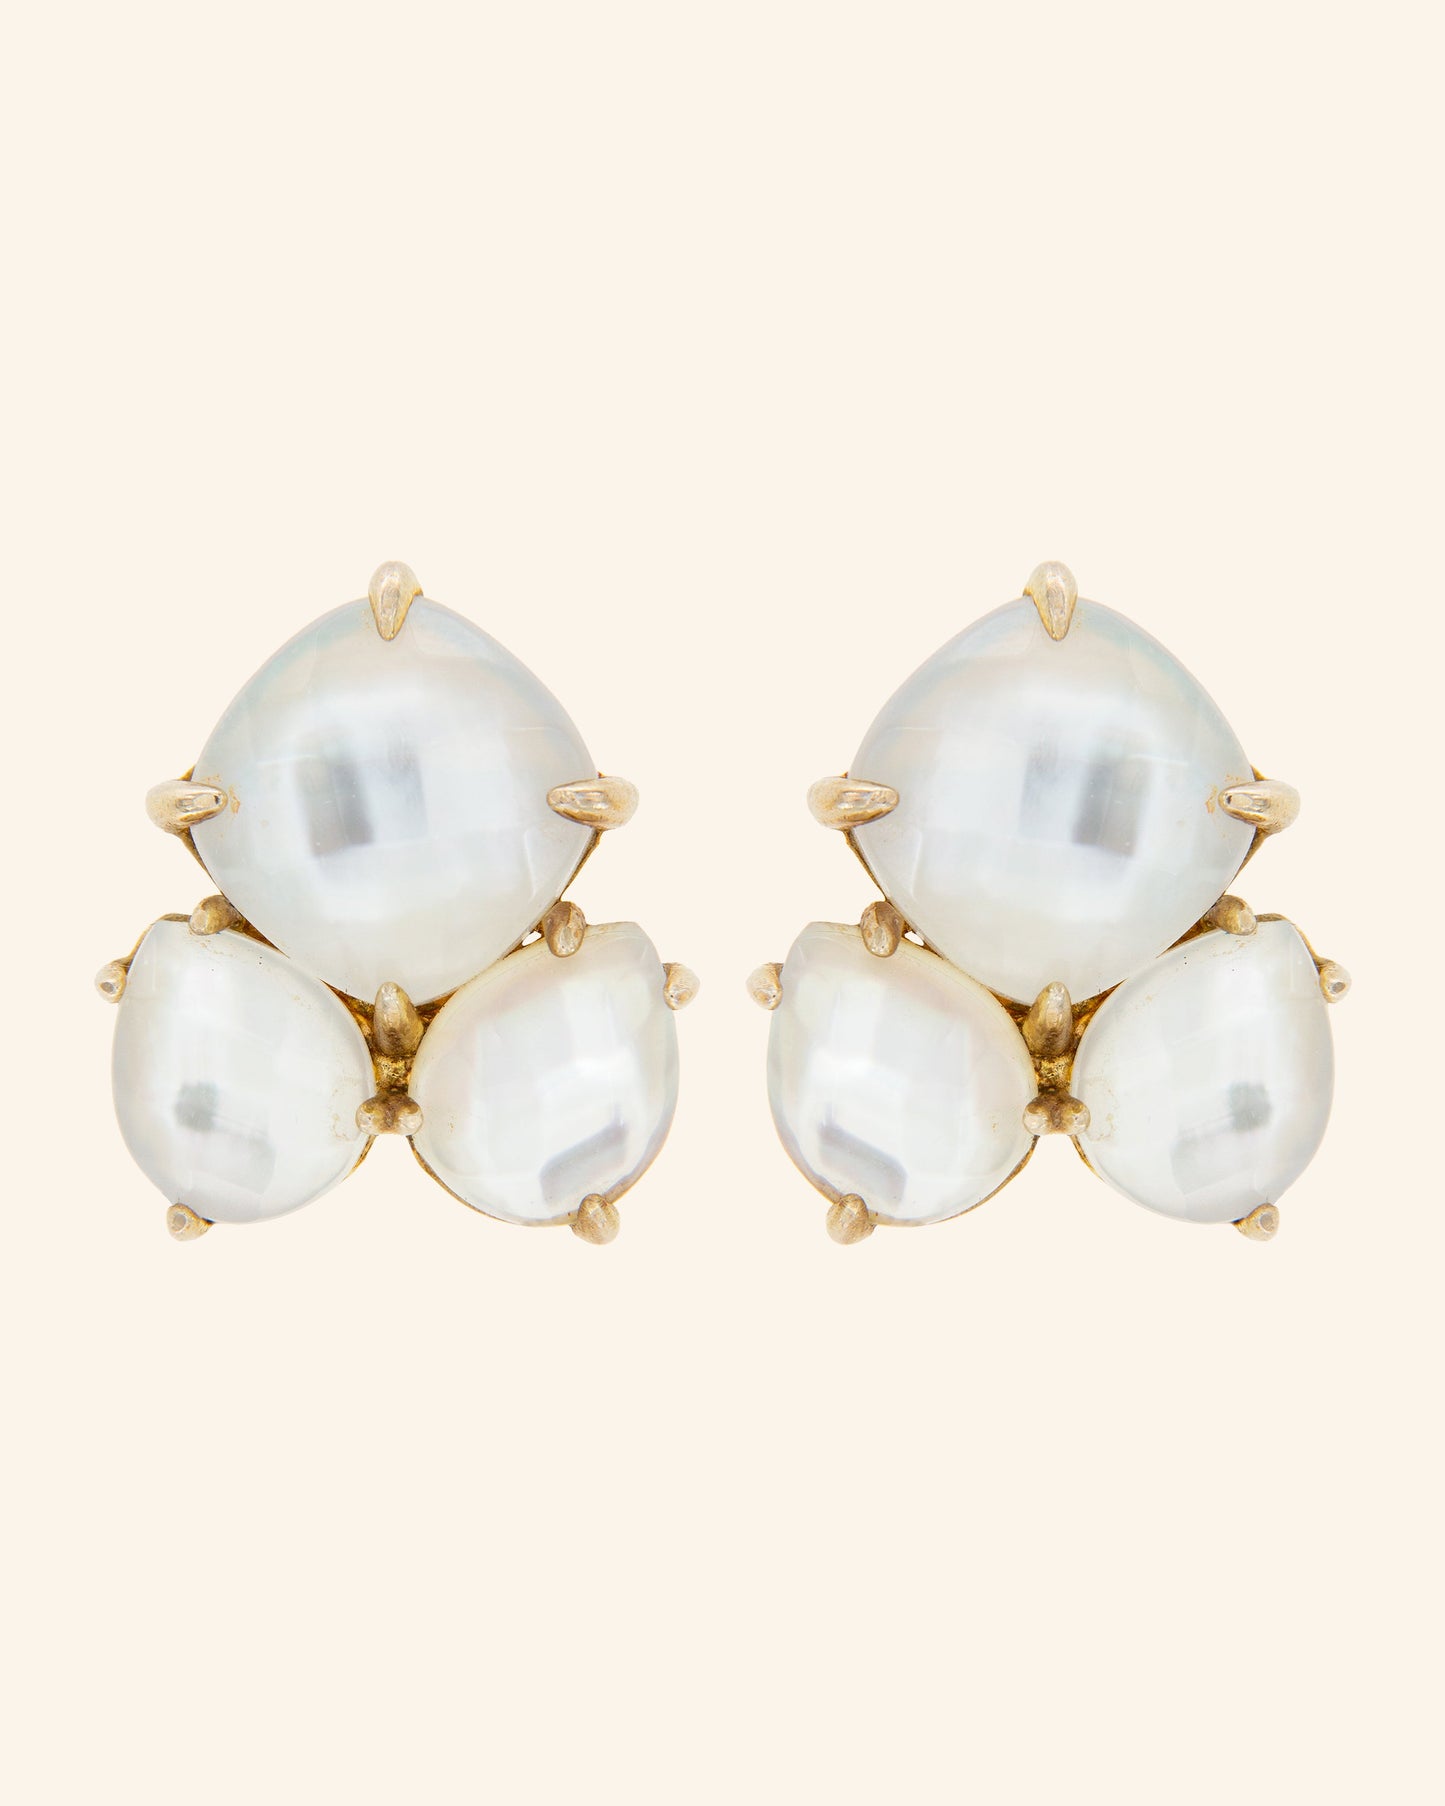 Mini Kraz earrings with white mother of pearl